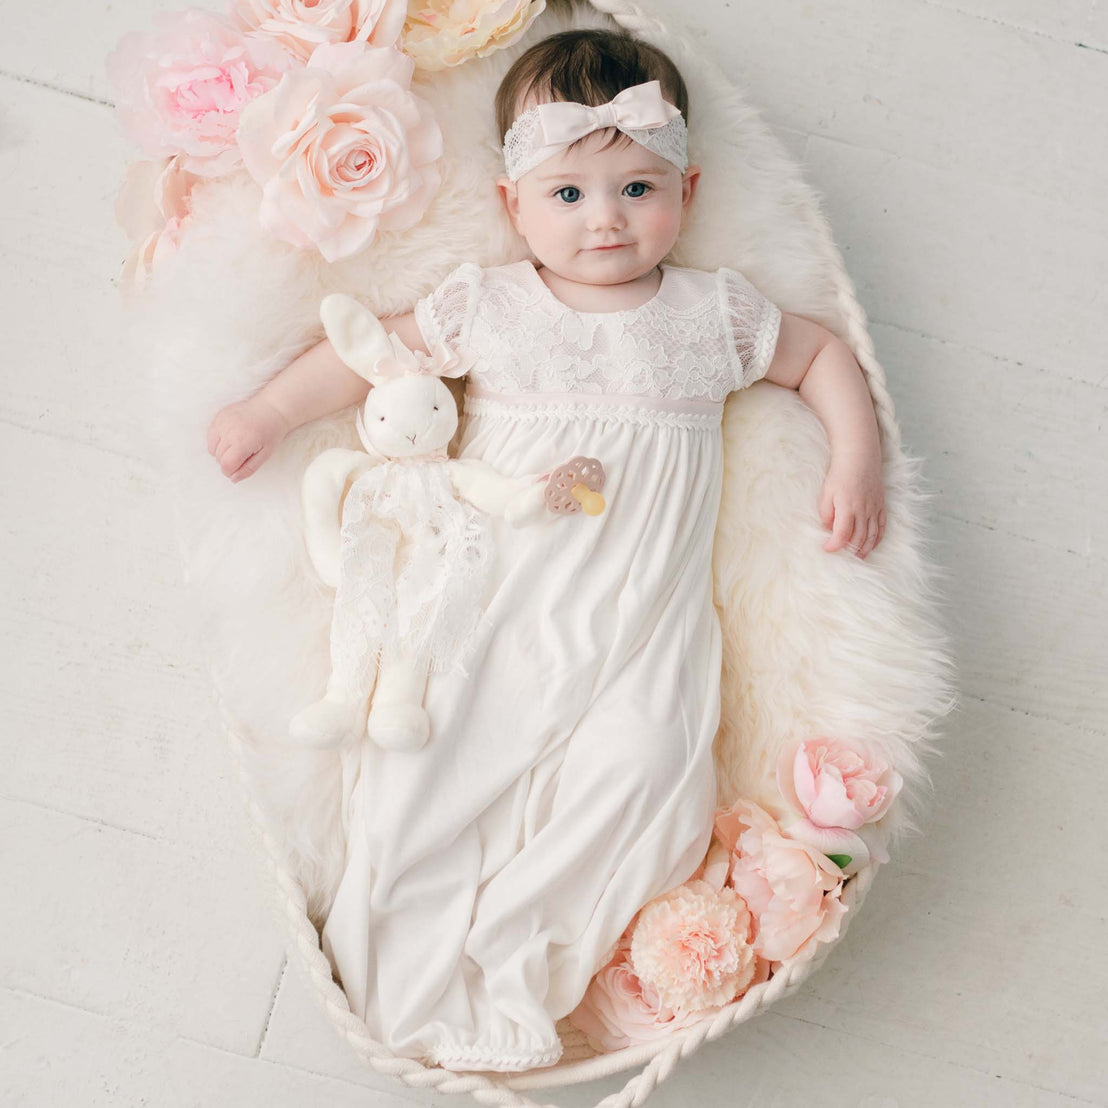 Baby girl pictured in her Victoria layette gown. Laying down in basket.